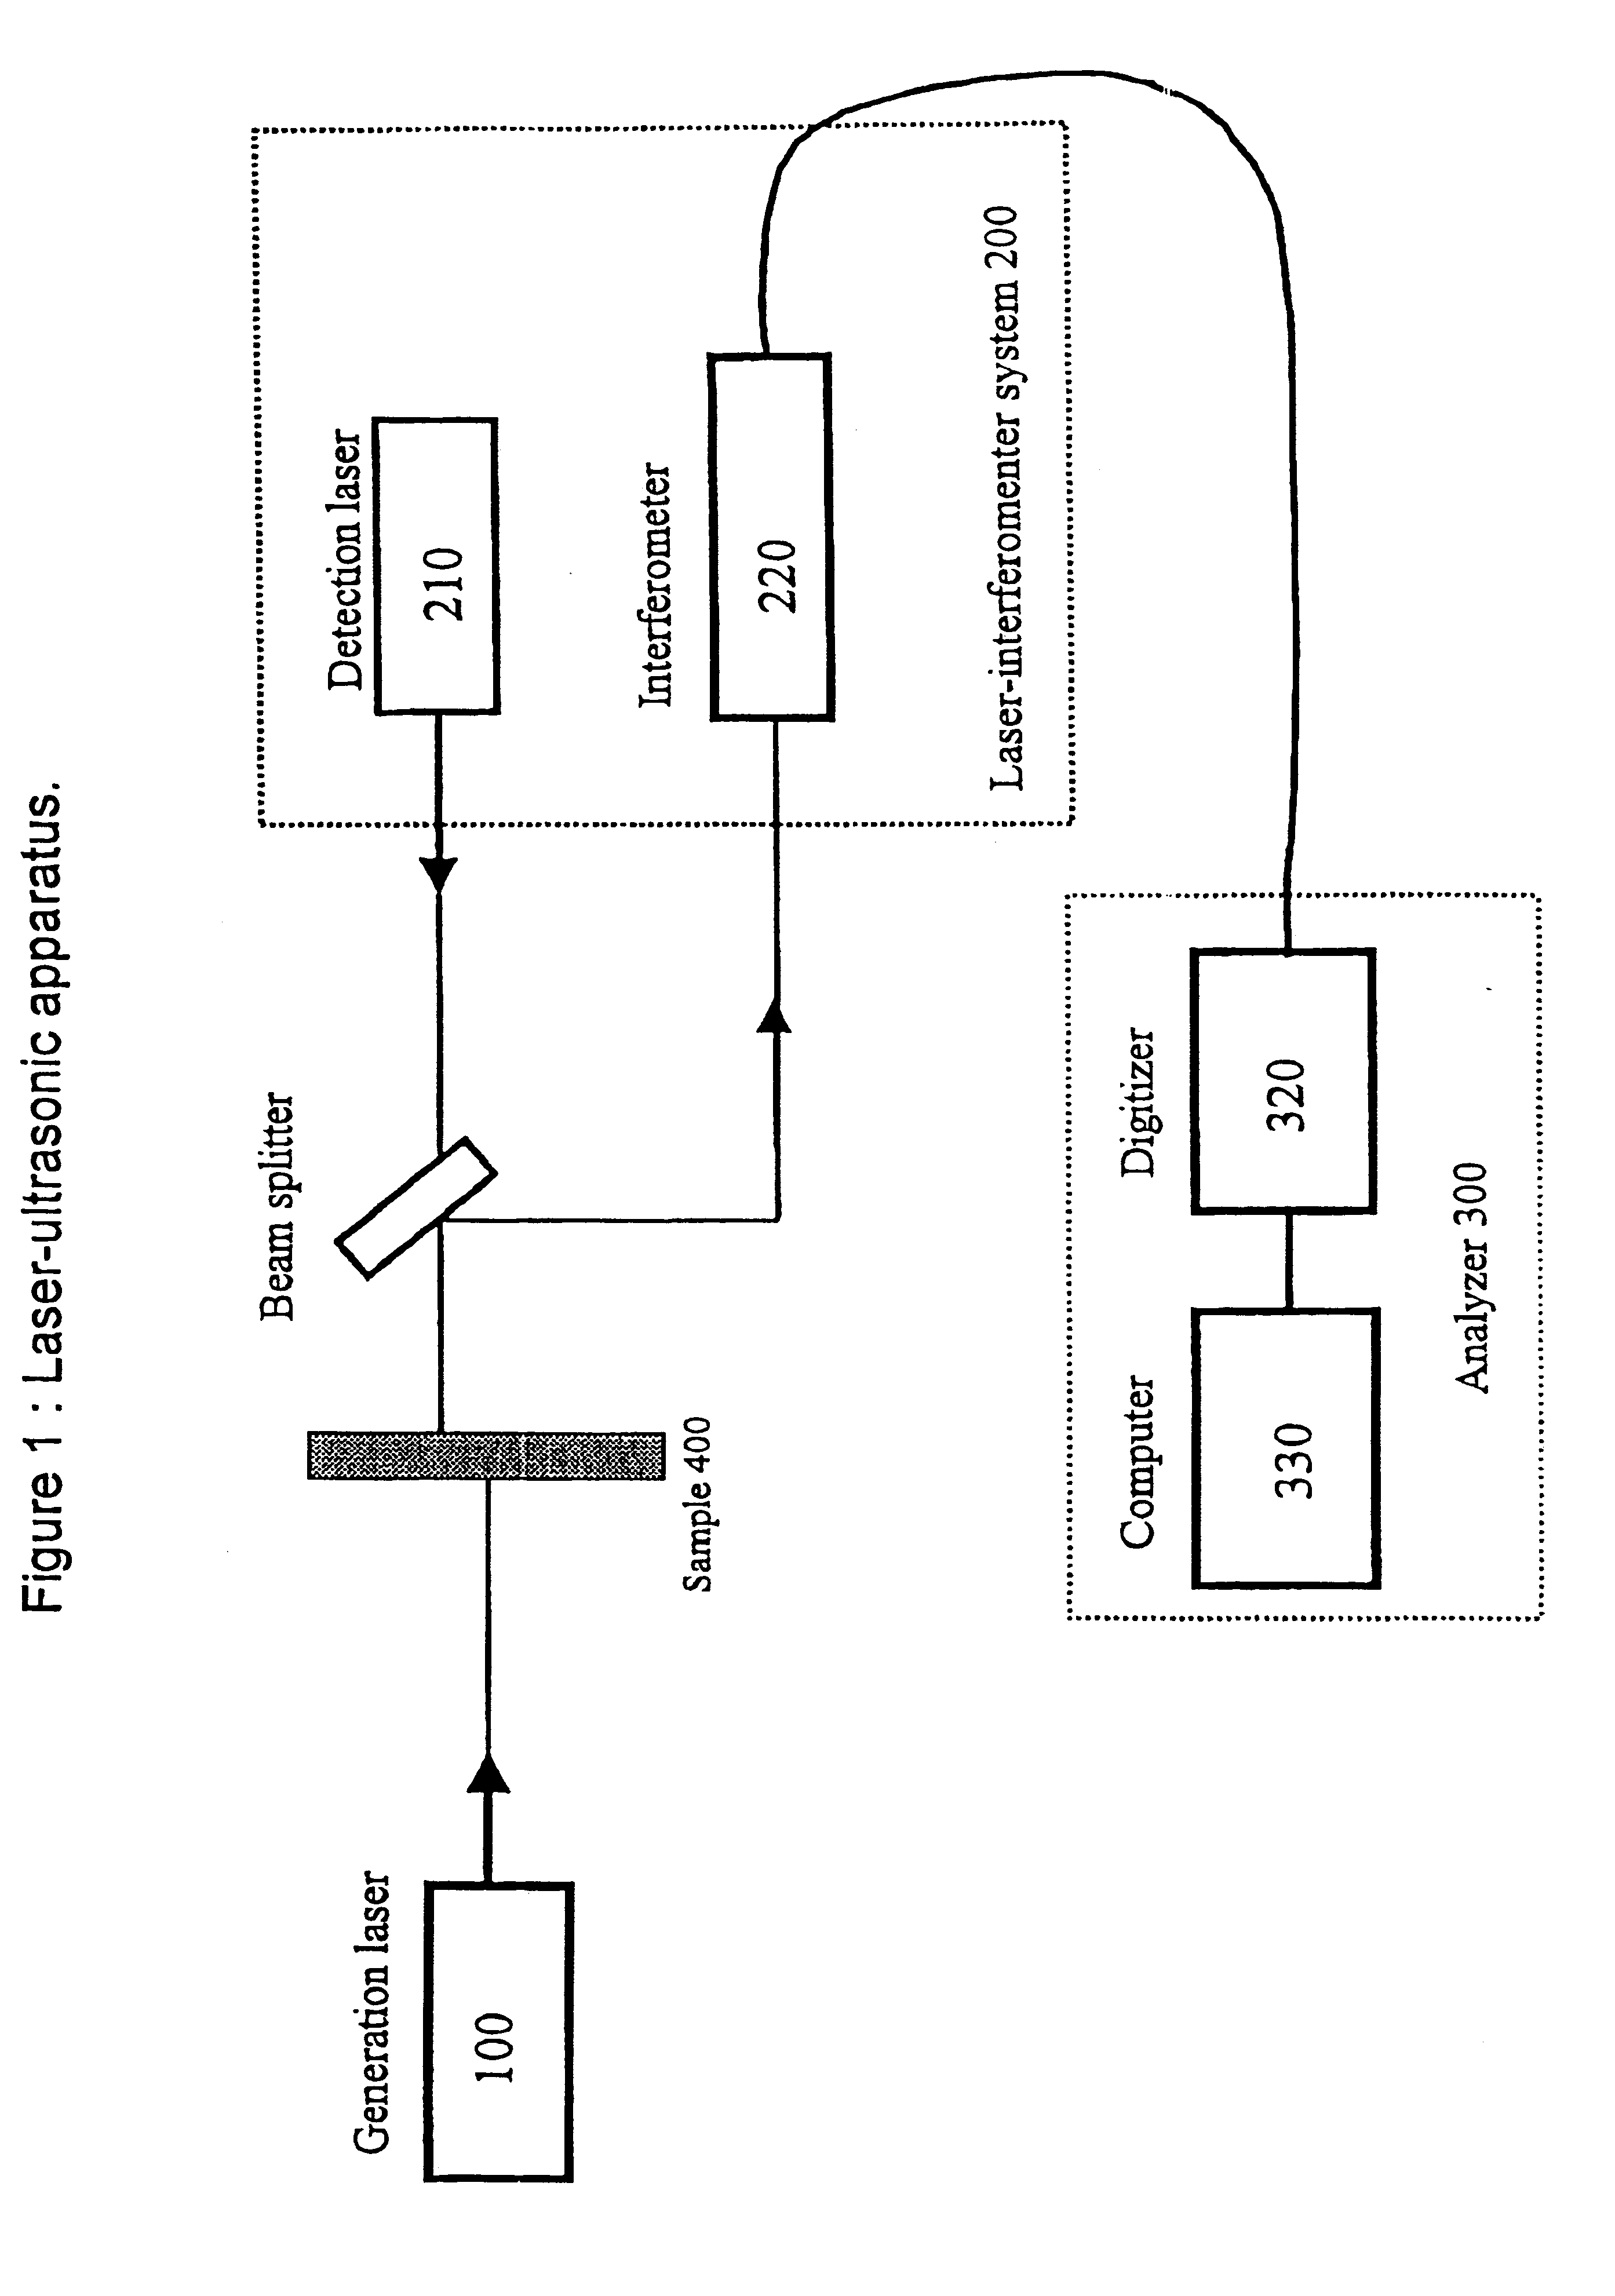 Apparatus and method for evaluating the physical properties of a sample using ultrasonics